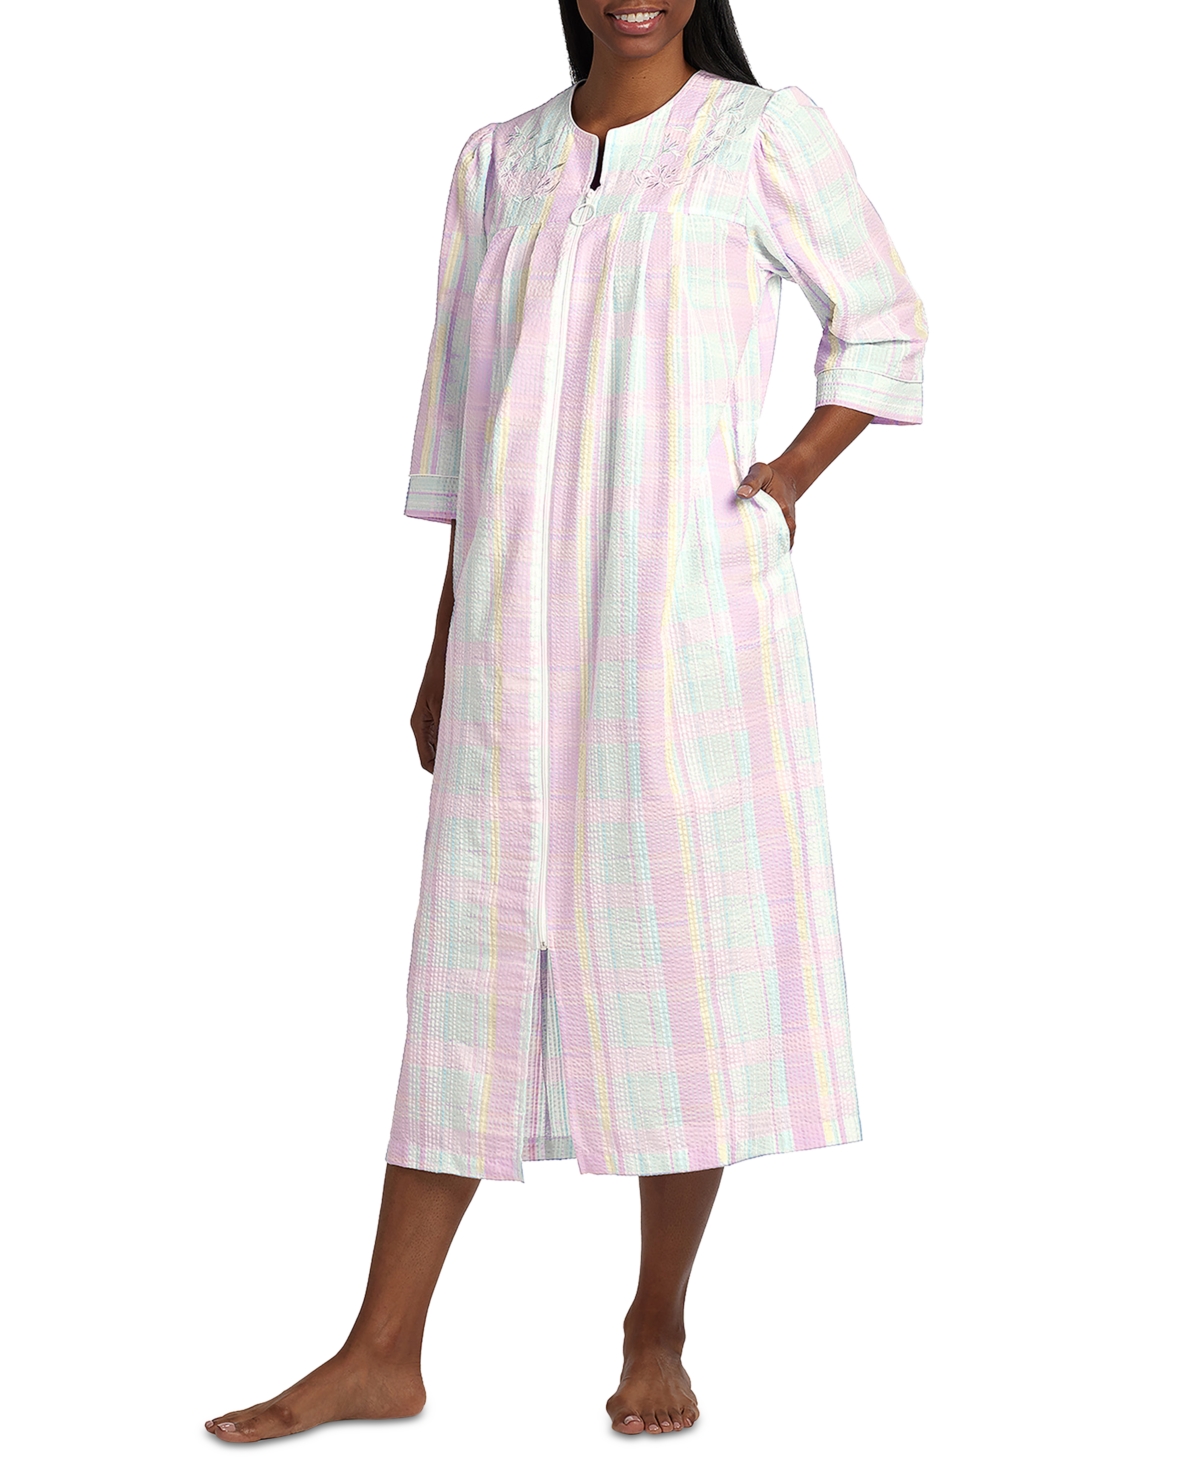 Women's 3/4-Sleeve Plaid Zip-Front Robe - Pink/blue/yellow Plaid